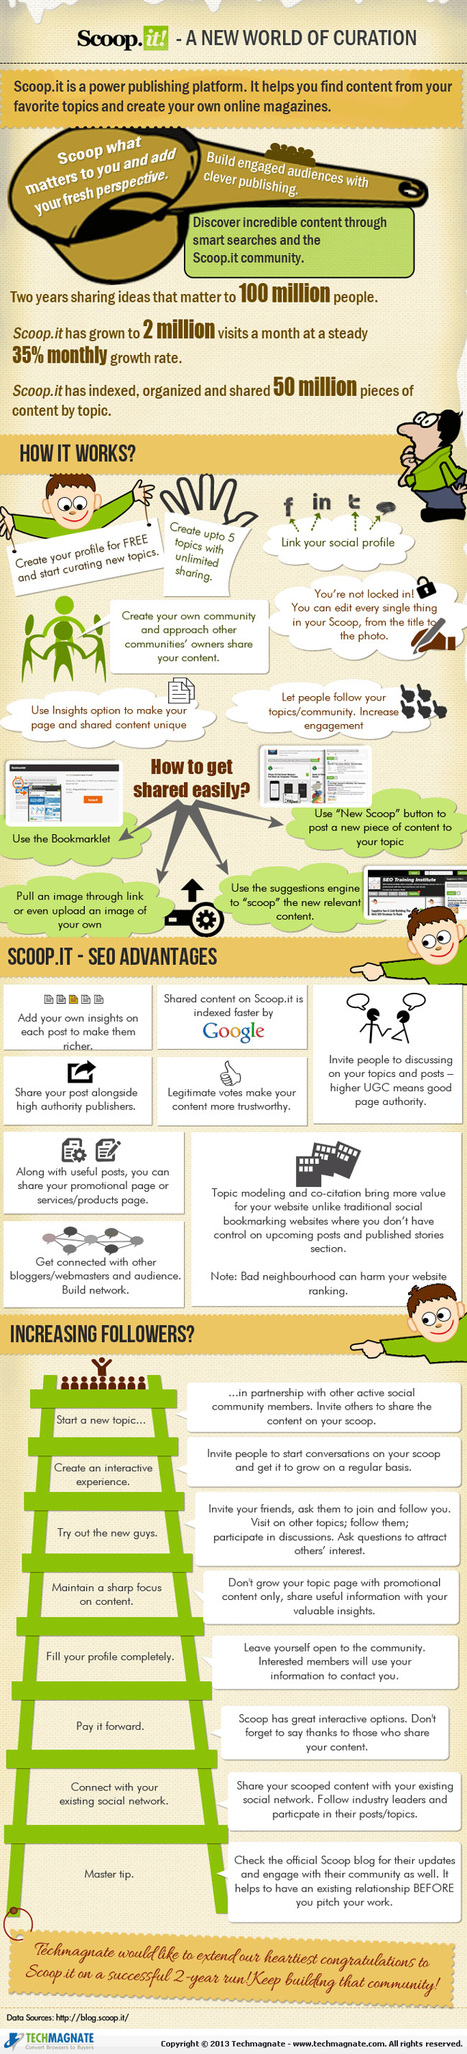 Scoop.It for SEO – A New World of Curation [Infographic] | Writing_me | Scoop.it